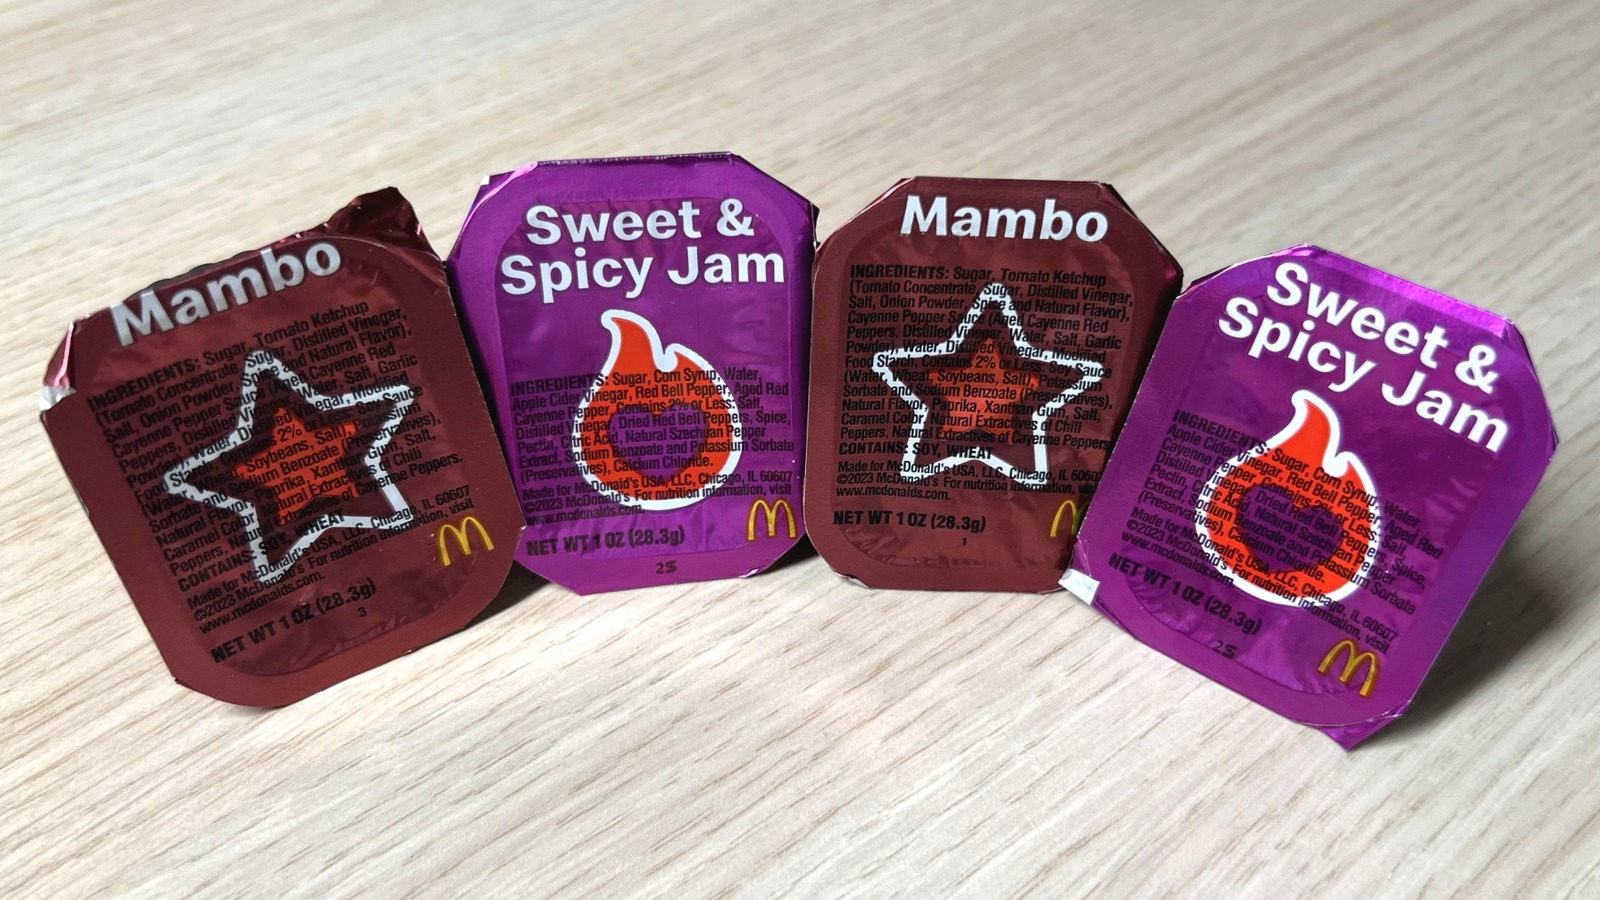 https://www.thedailymeal.com/img/gallery/mcdonalds-mambo-sweet-spicy-jam-sauces-review-we-took-a-dip-and-now-were-hooked/l-intro-1696602583.jpg